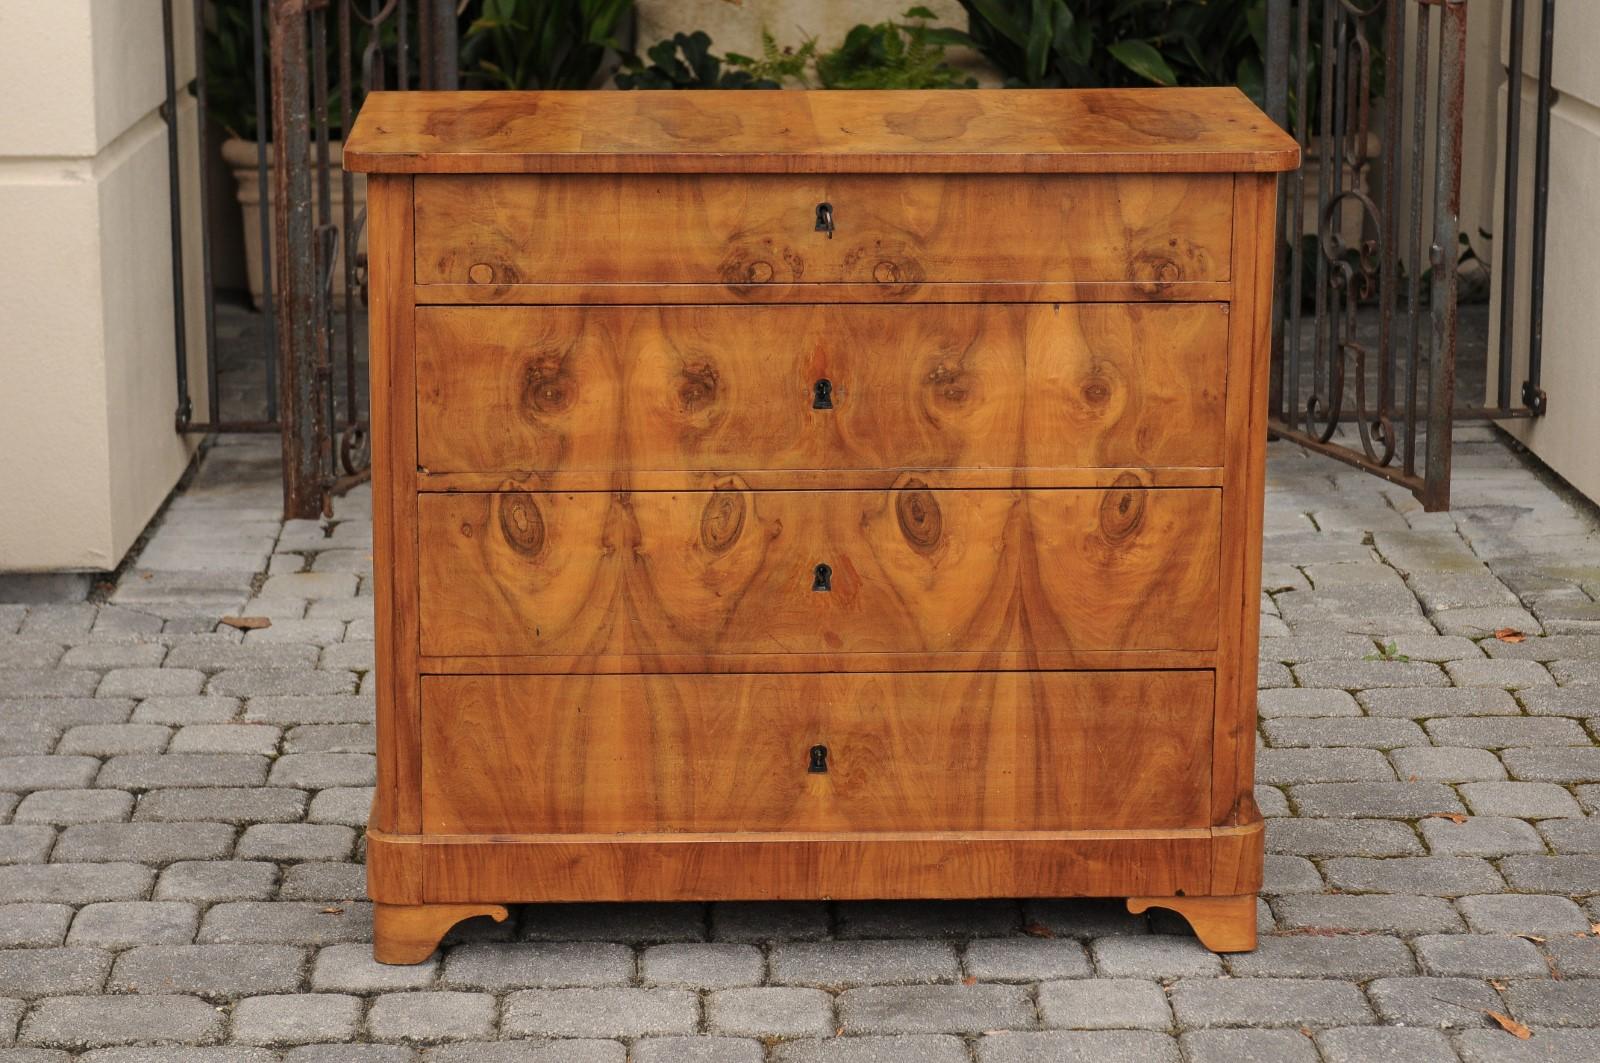 A French burled walnut commode from the late 19th century, with four graduated drawers. Born in the third quarter of the 19th century, this French four-drawer commode features a rectangular bookmark veneered top with rounded corners in the front,